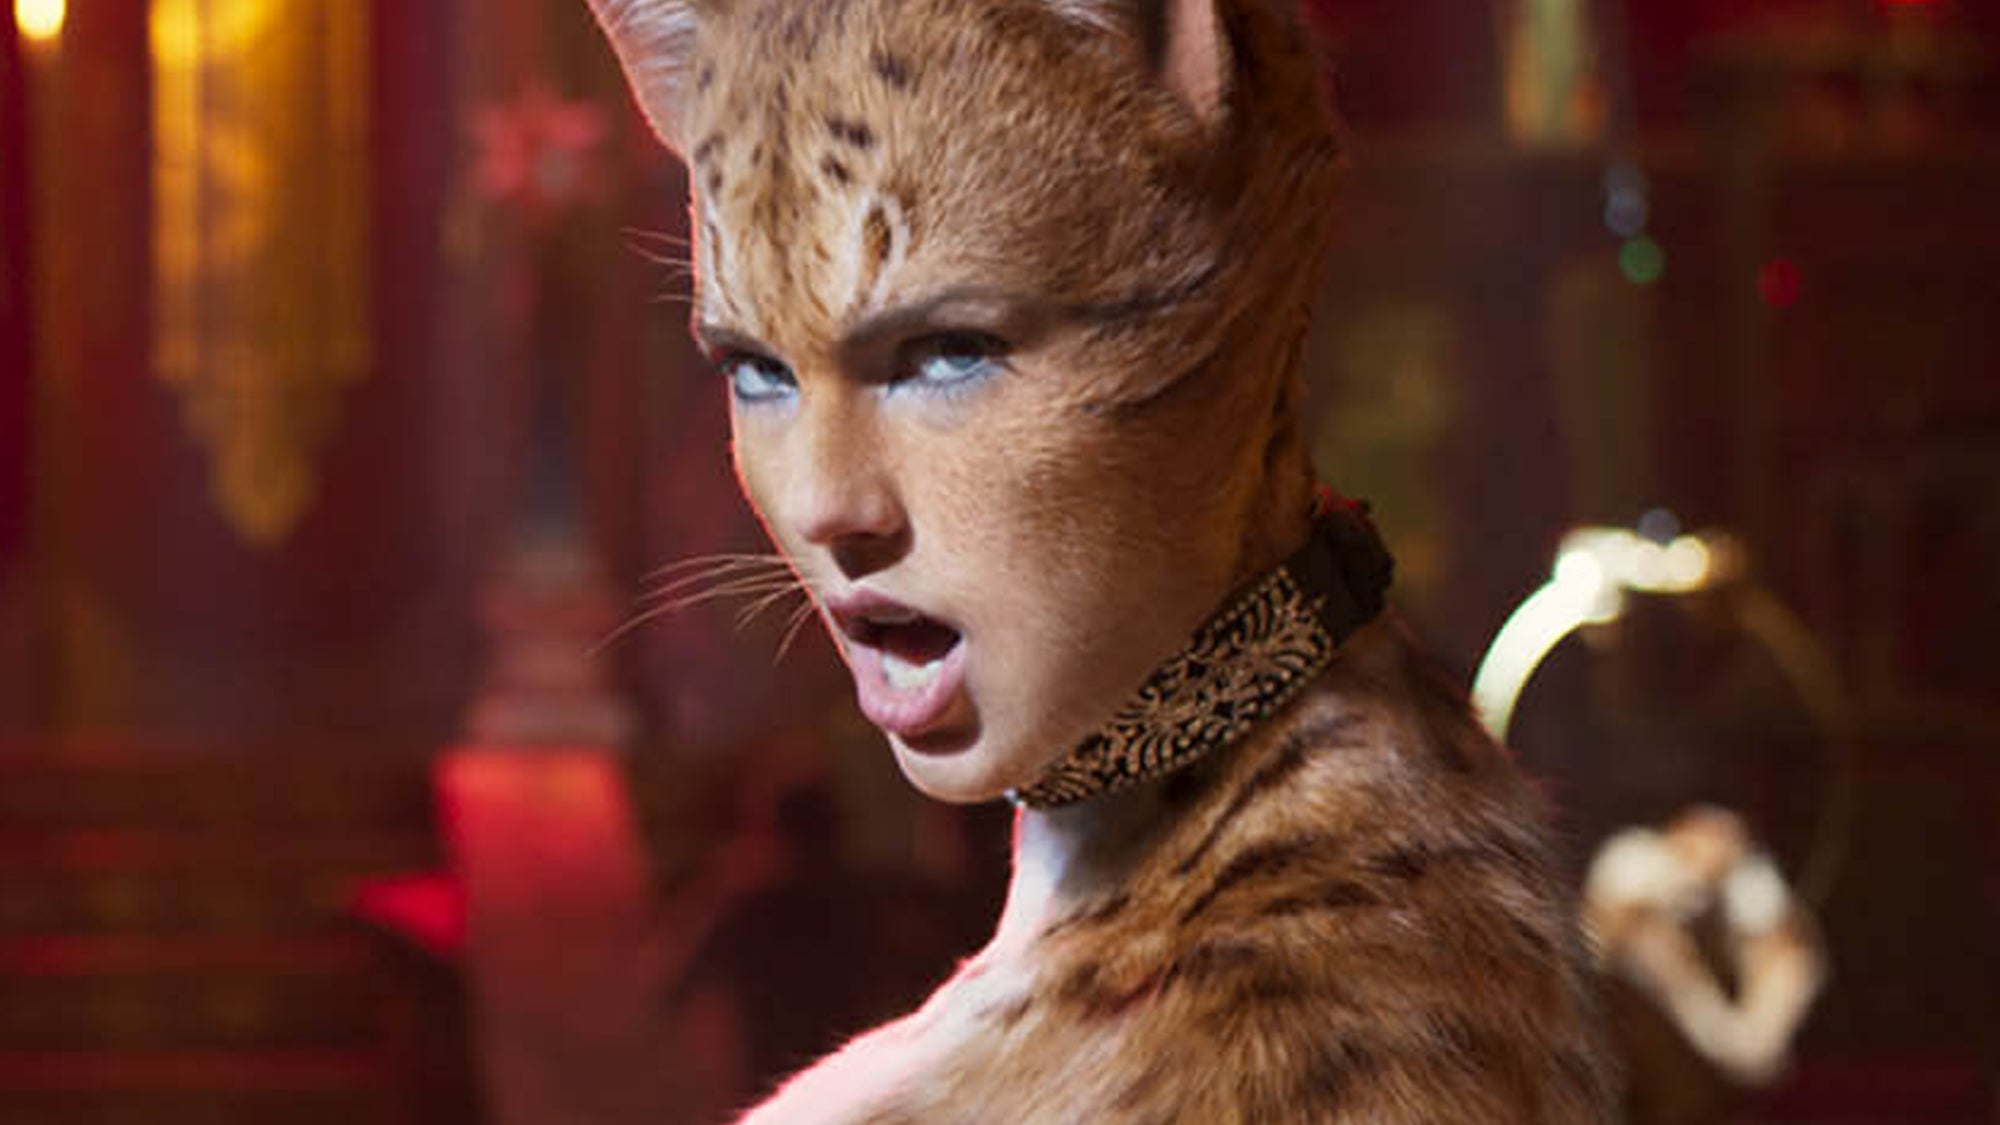 The New Cats Trailer Is Filled With Purrs Puns